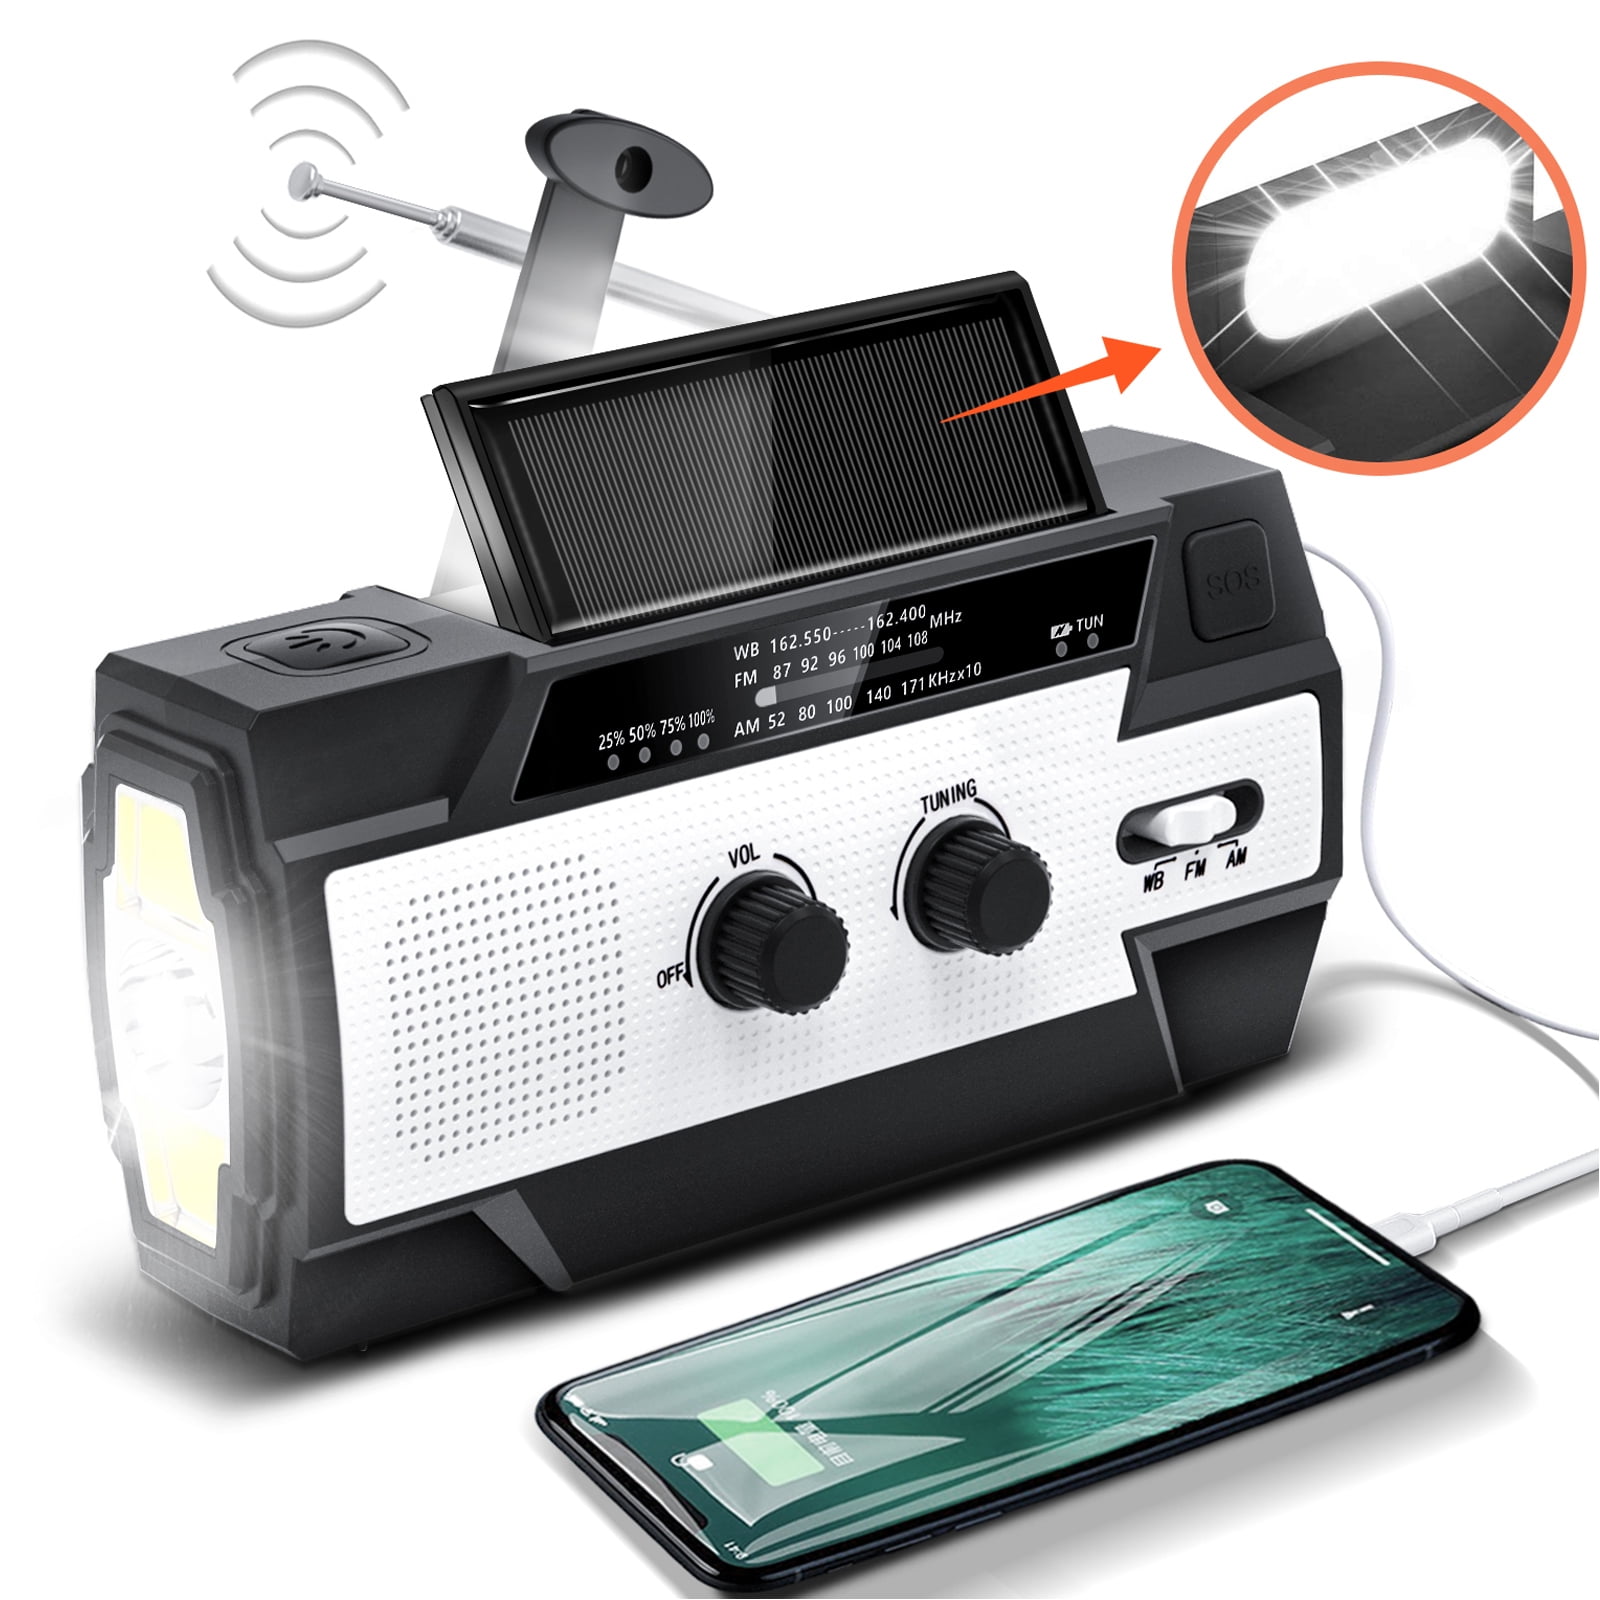 Portable Power Bank 4000mAh Hand Crank AM/FM/NOAA Weathe Radio with Flashlight Reading Lamp Cellphone Charger Headphone Jack SOS Alarm for Camping Home Outdoor Emergency Crank Weather Solar Radio 